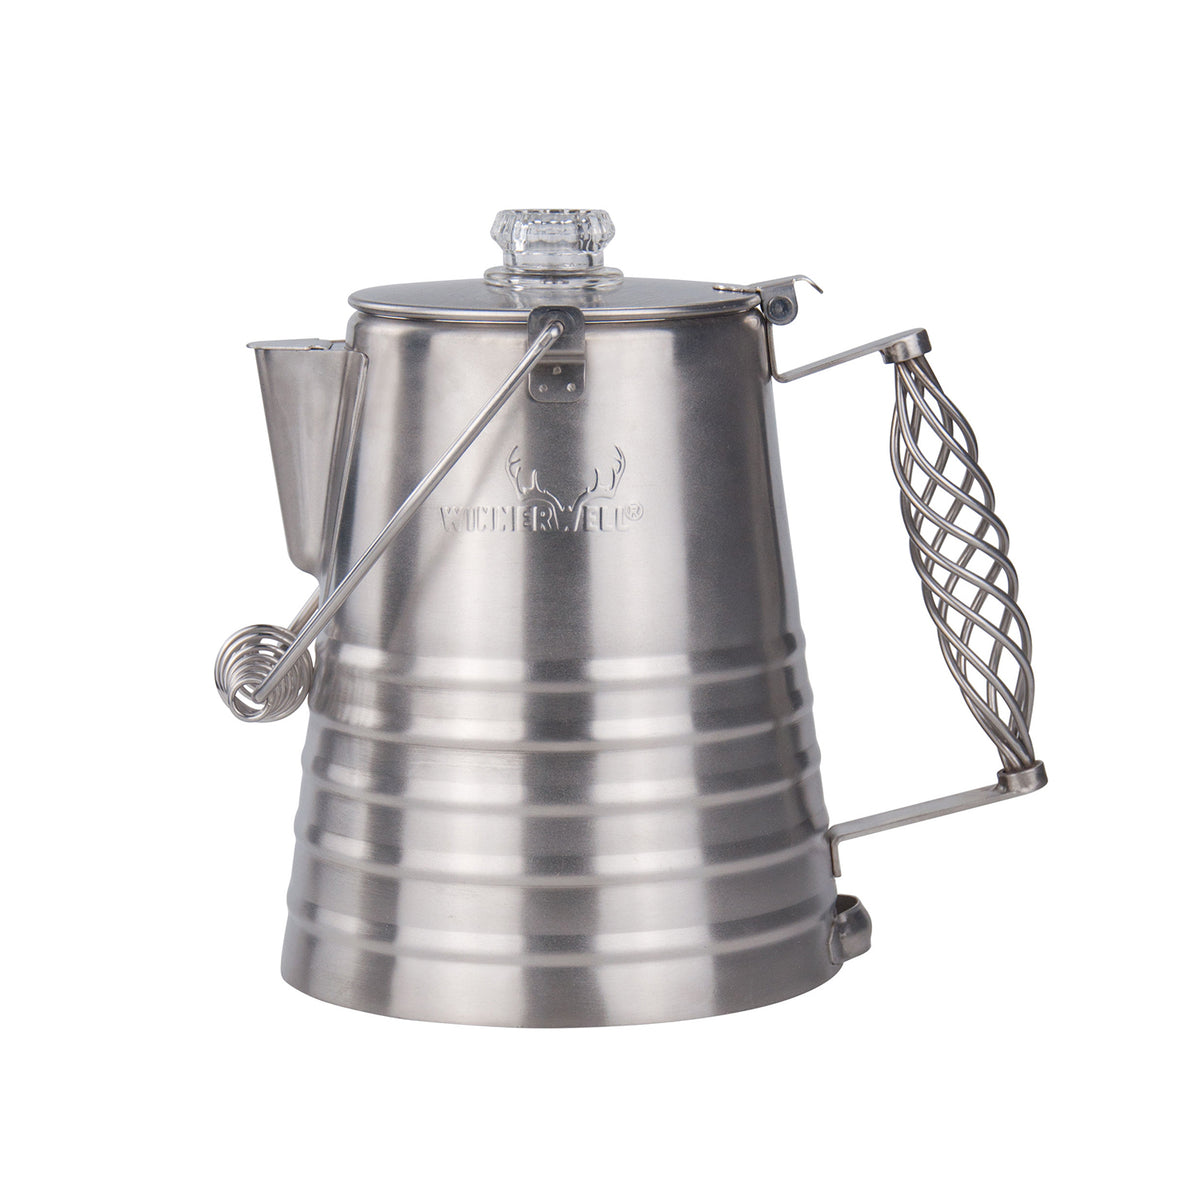 Norpro Stainless Steel Percolator 9 Cup 549